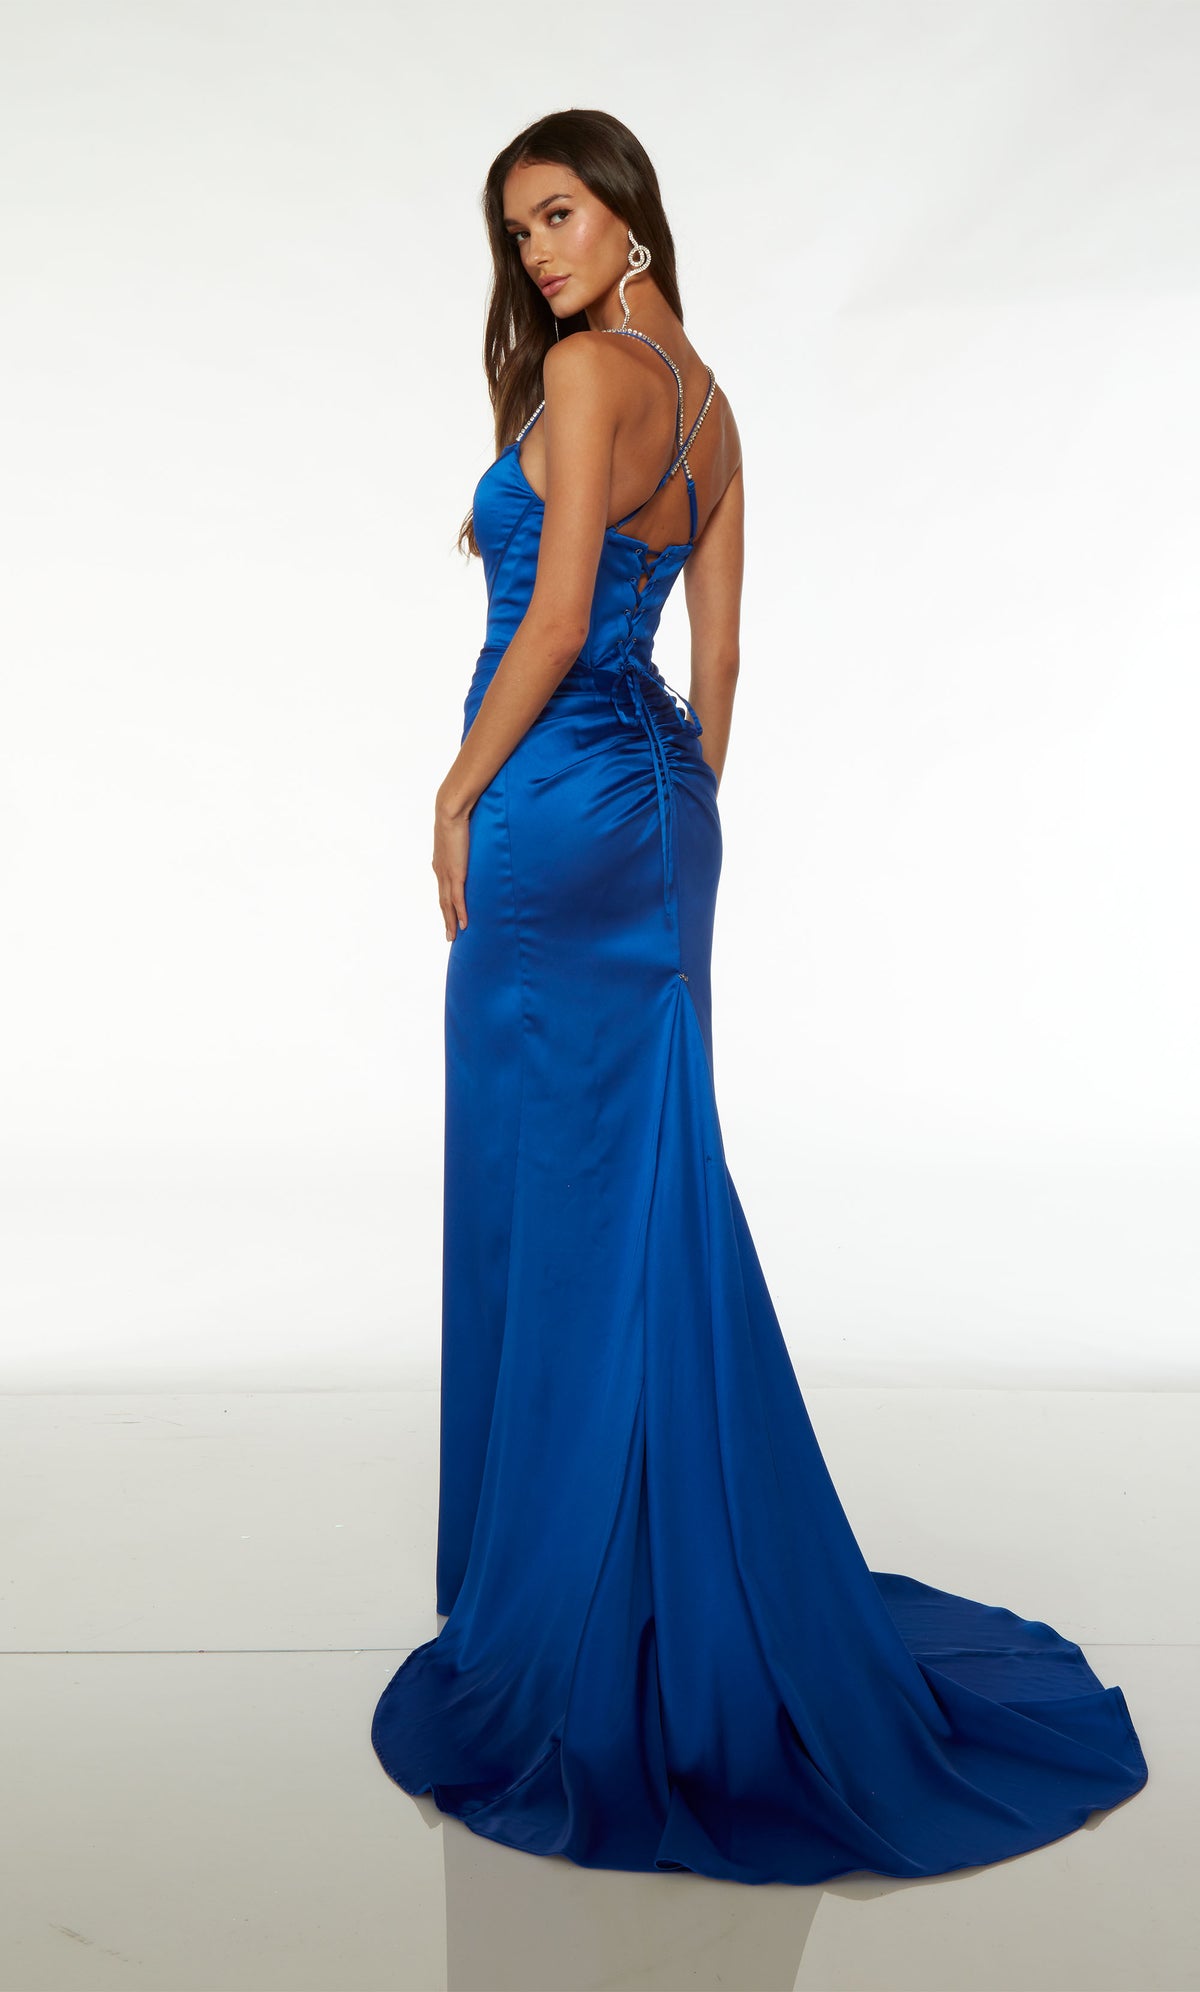 Blue satin corset gown with square neckline, gathered waist, high slit, jeweled straps, lace-up back, and detachable side train for added flair.